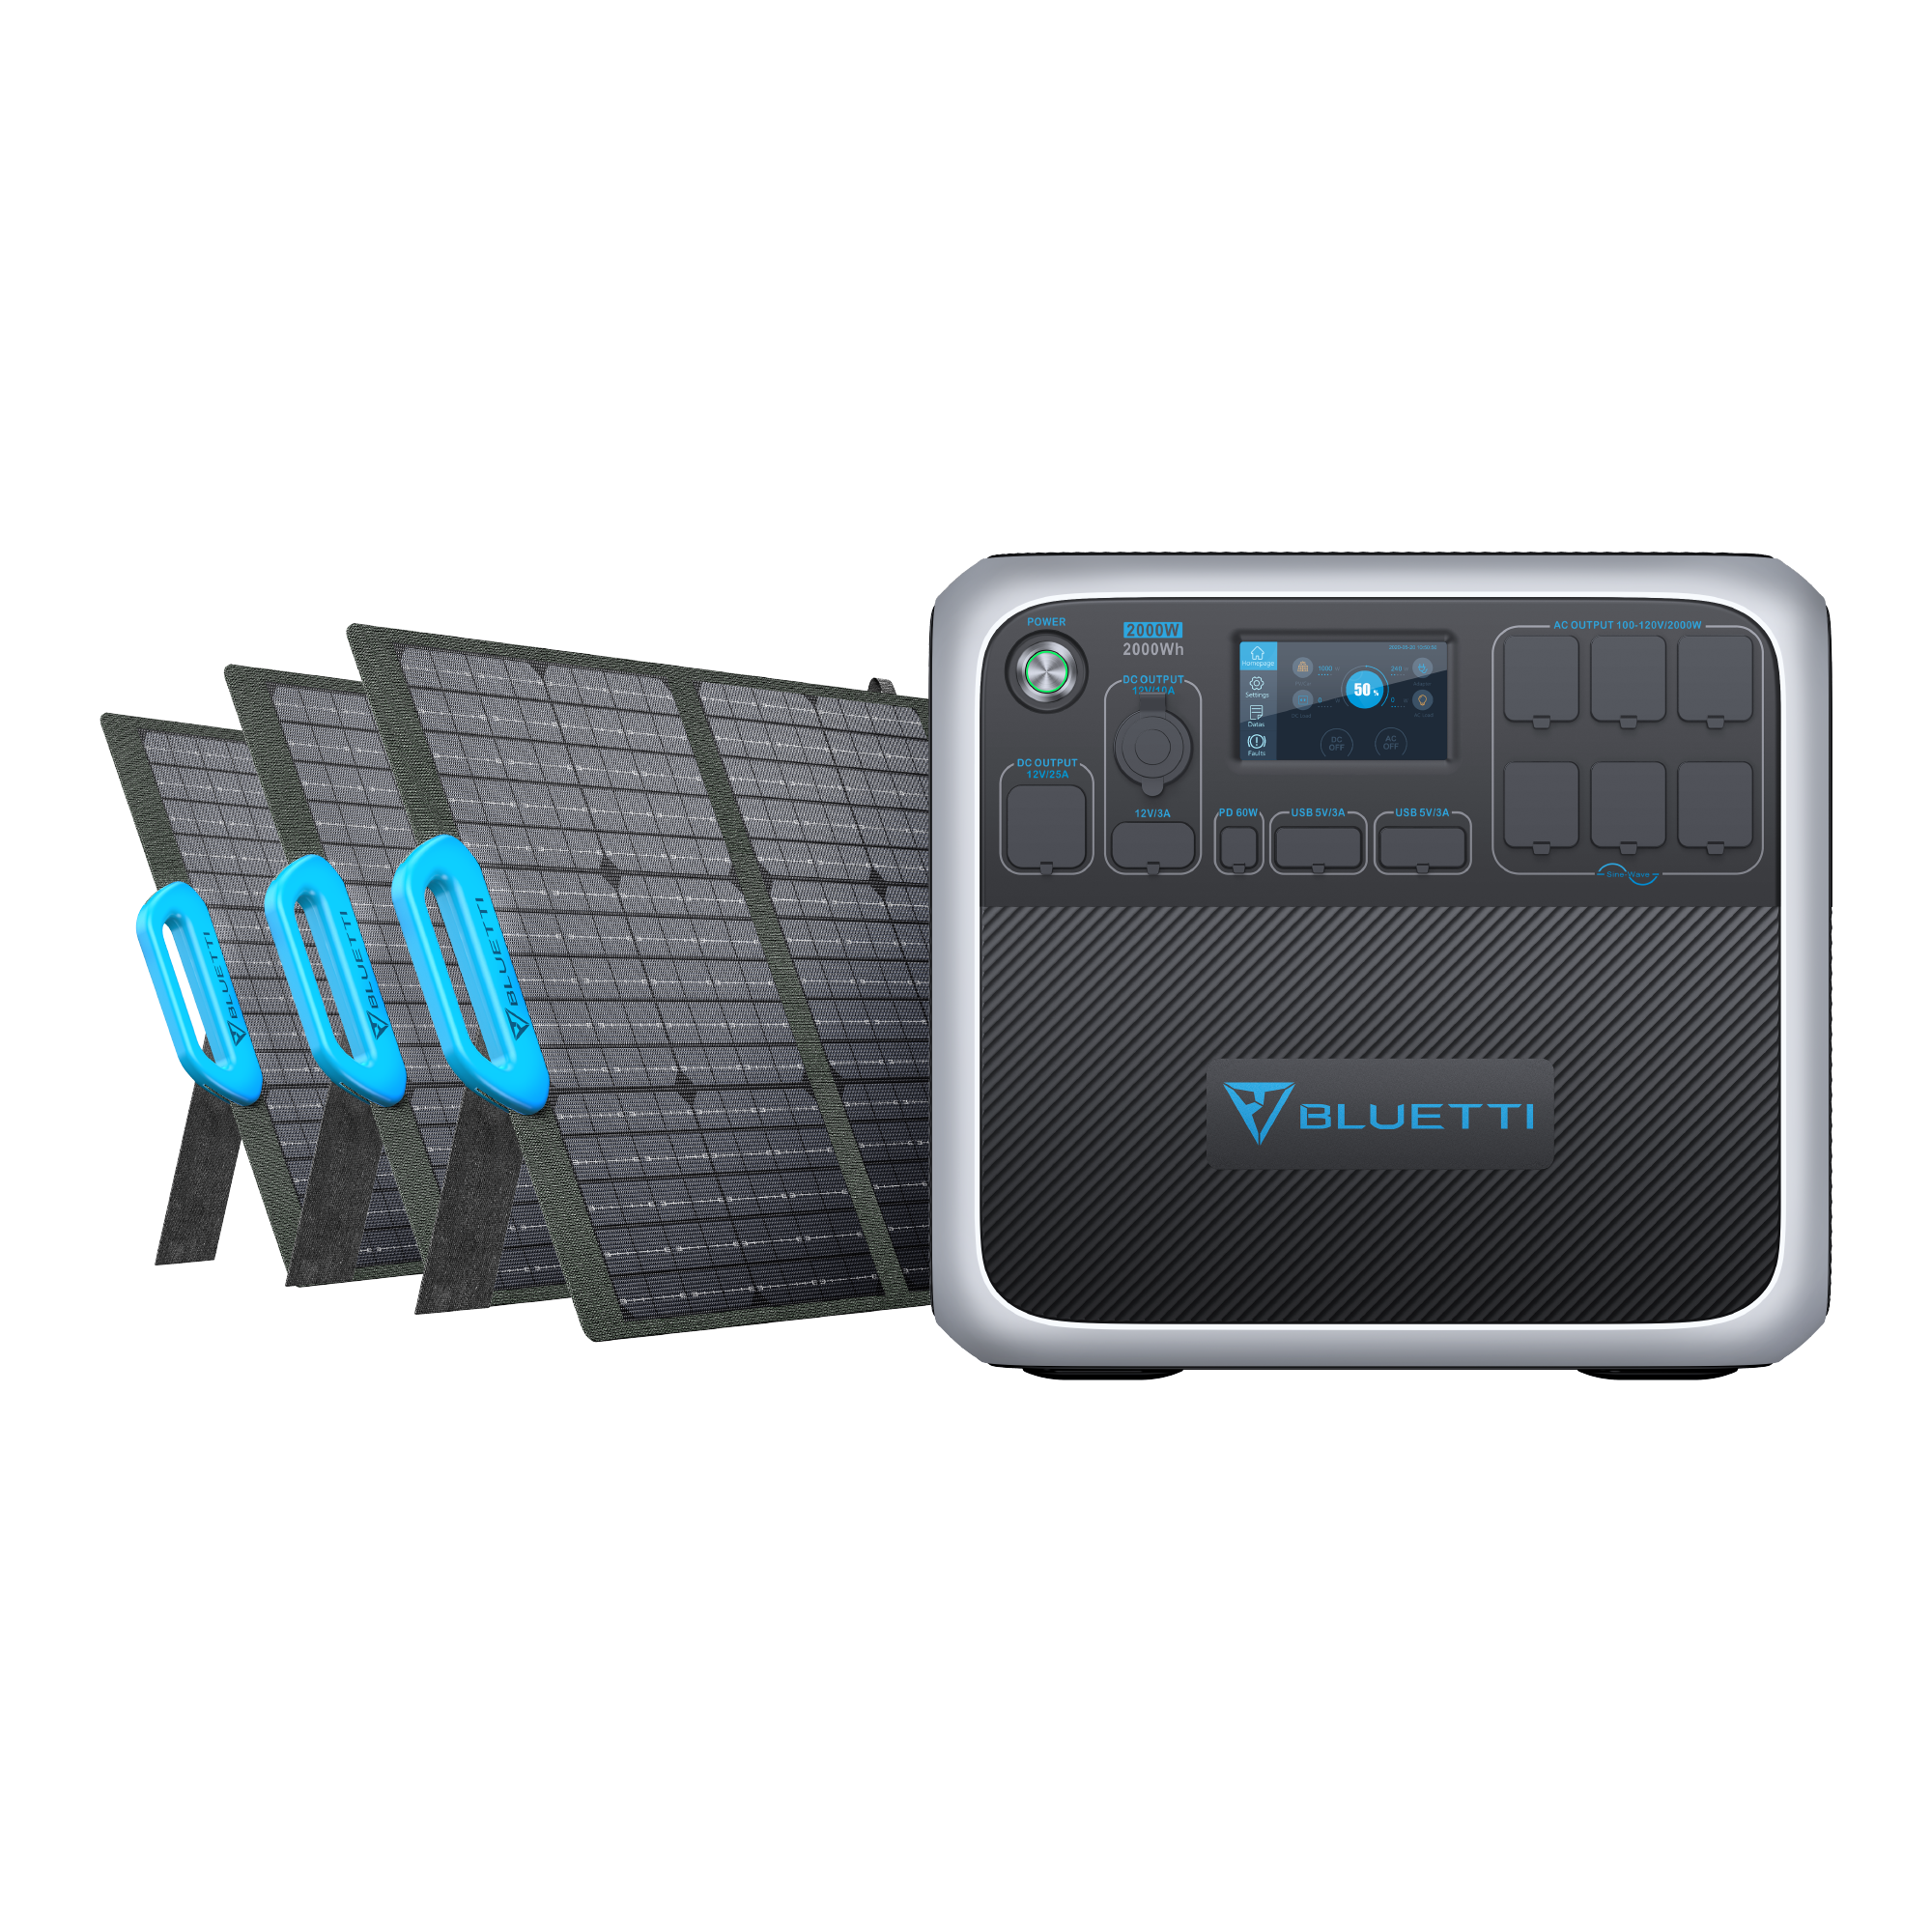 Best Home Backup Power-Bluetti AC200P Portable Power Sation with Solar Panel